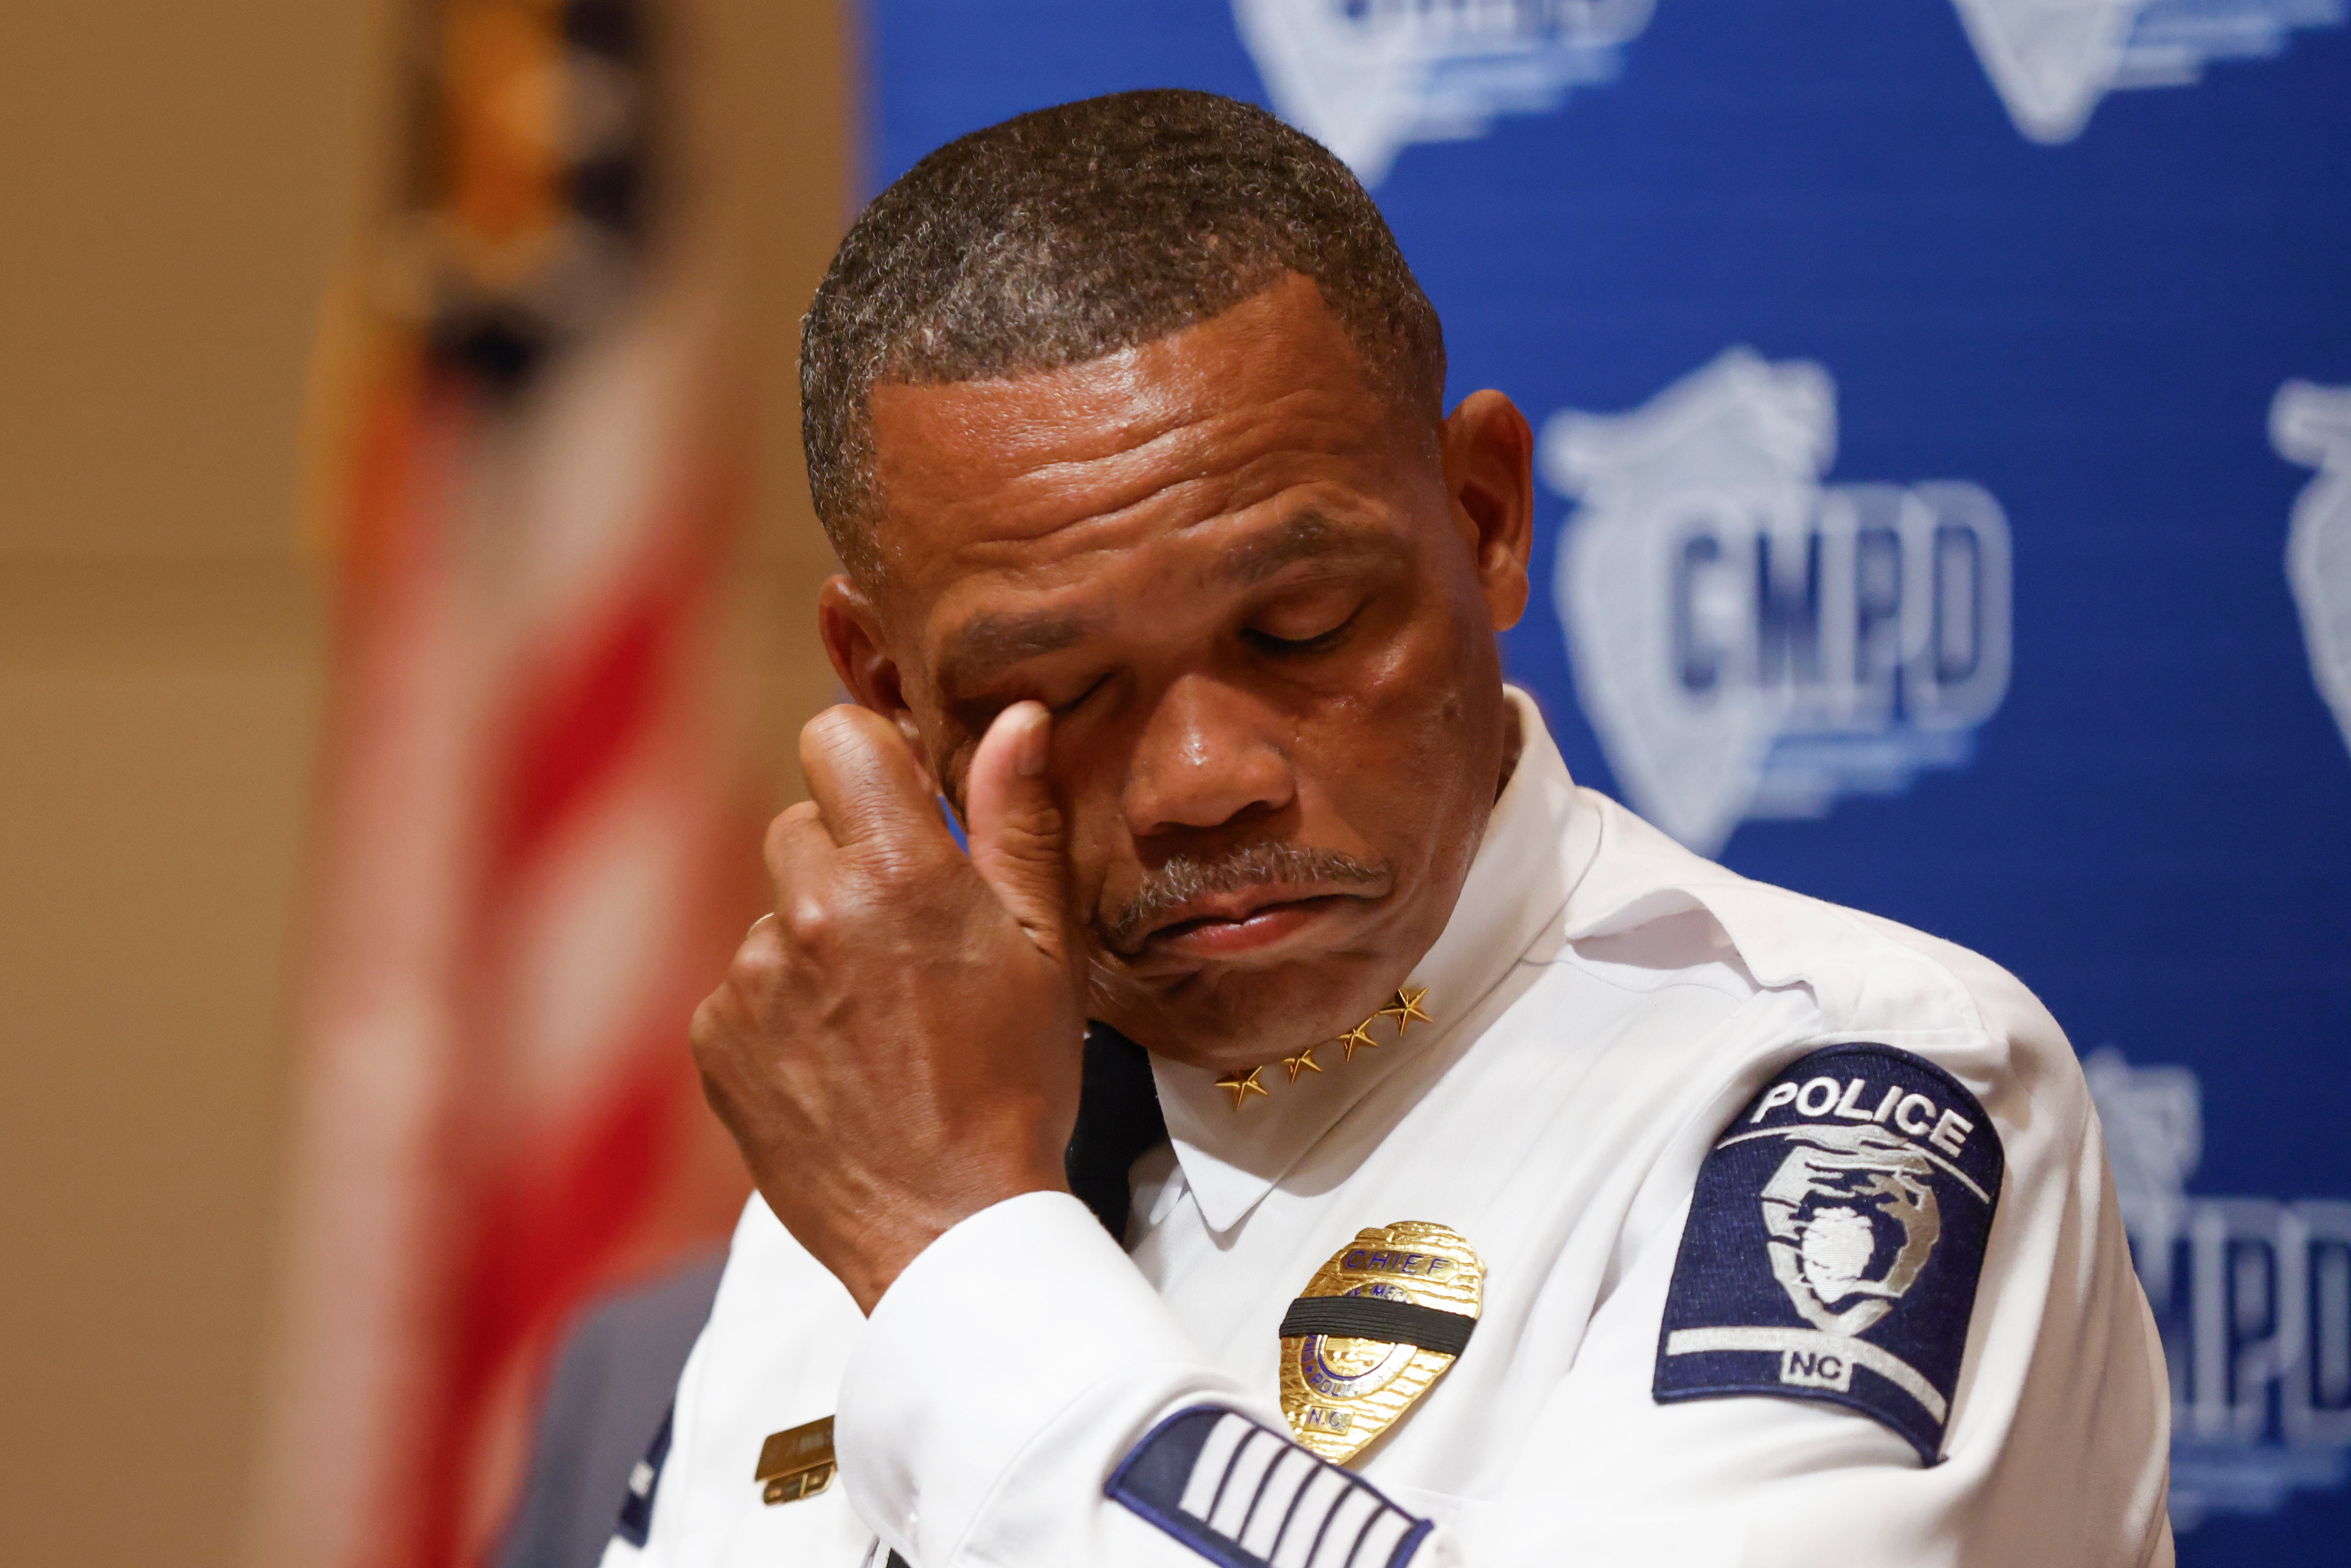 Police Chief Johnny Jennings wipes away tears as he speaks at a press conference on Tuesday